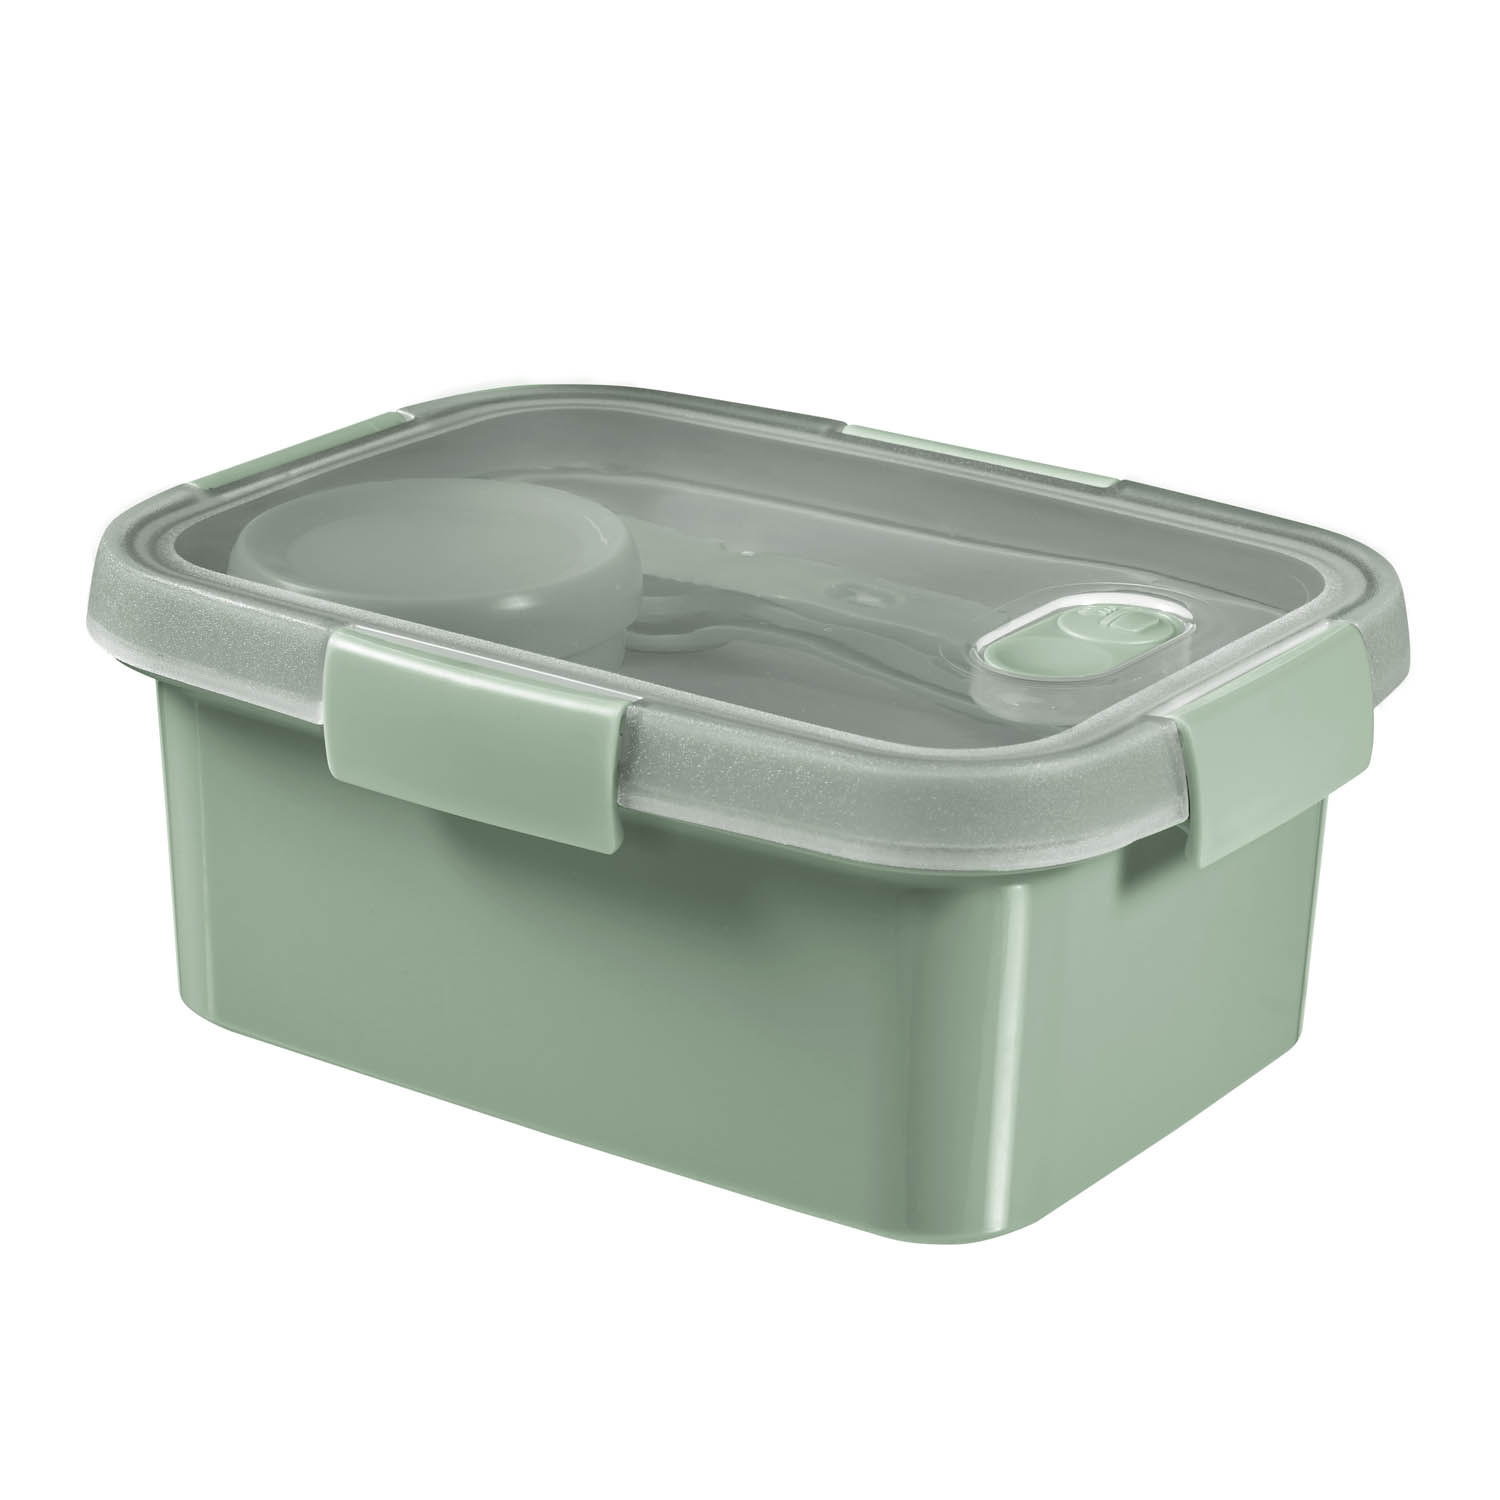 CURVER LUNCHBOX SMART TO GO ECO 1,2L - 101 7161 - 526511